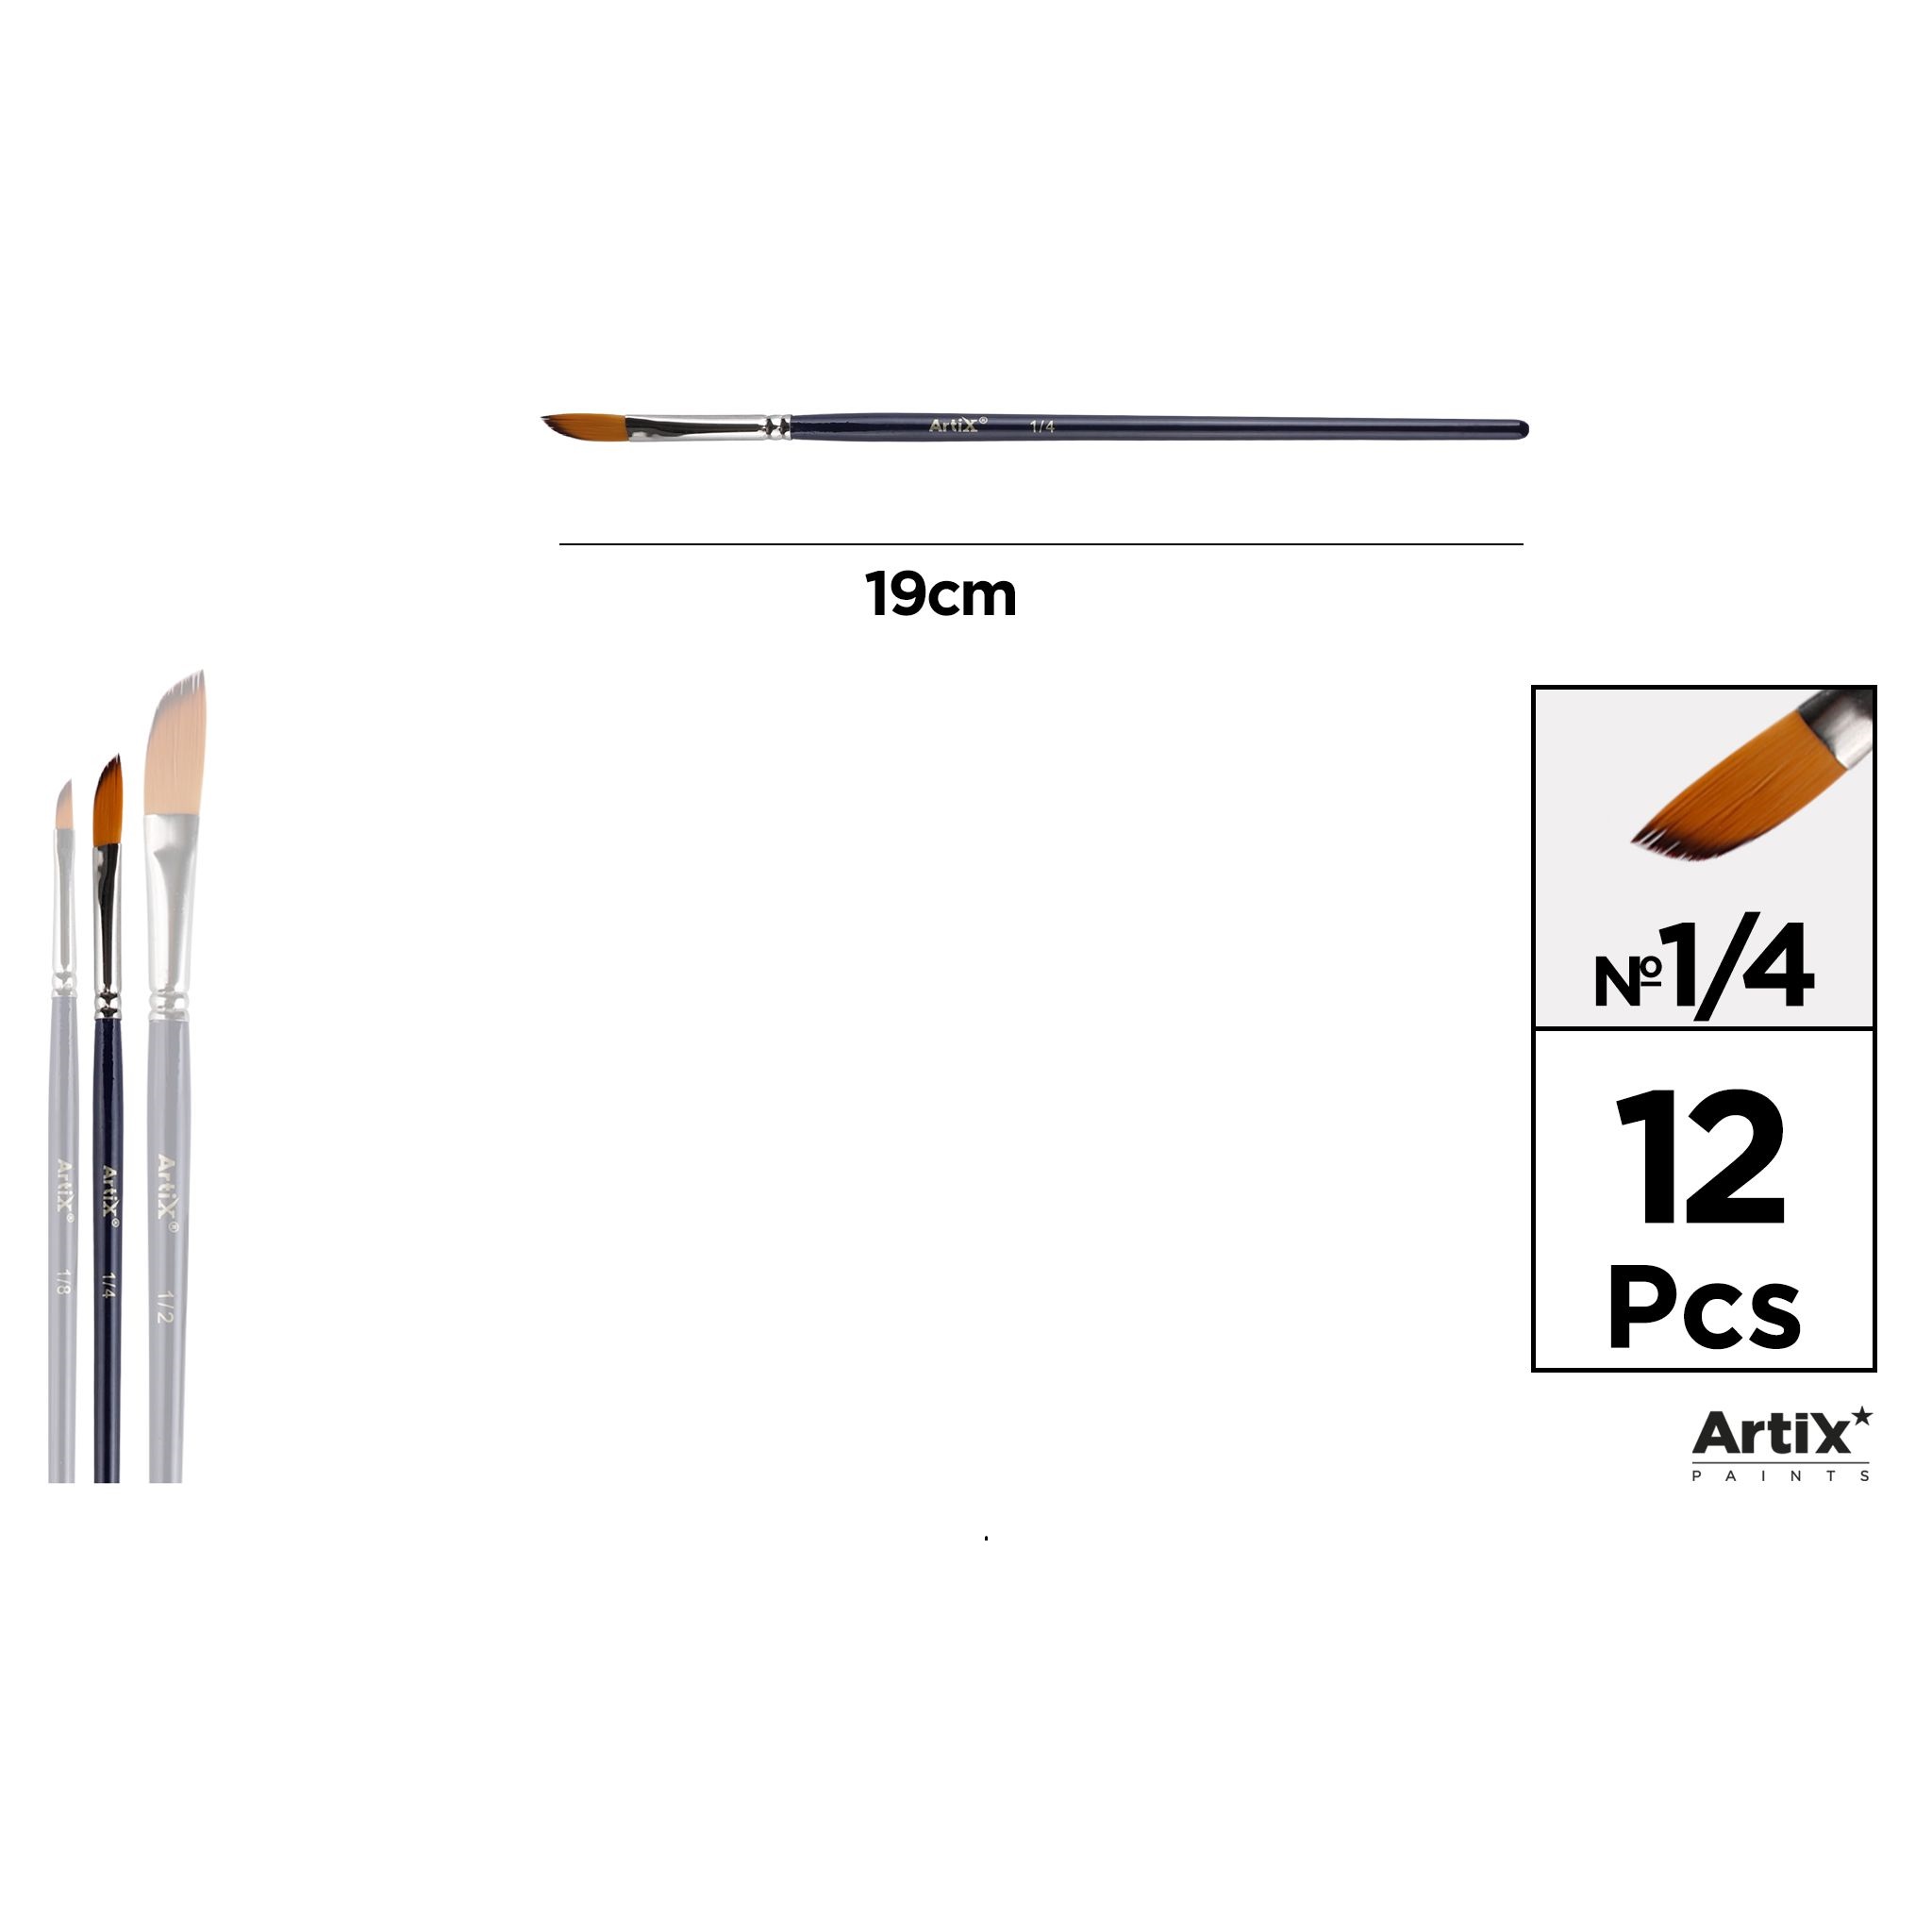 PP341 Professional Art Brushes Angle Rubber Art Brushes Watercolor Acrylic Tempera